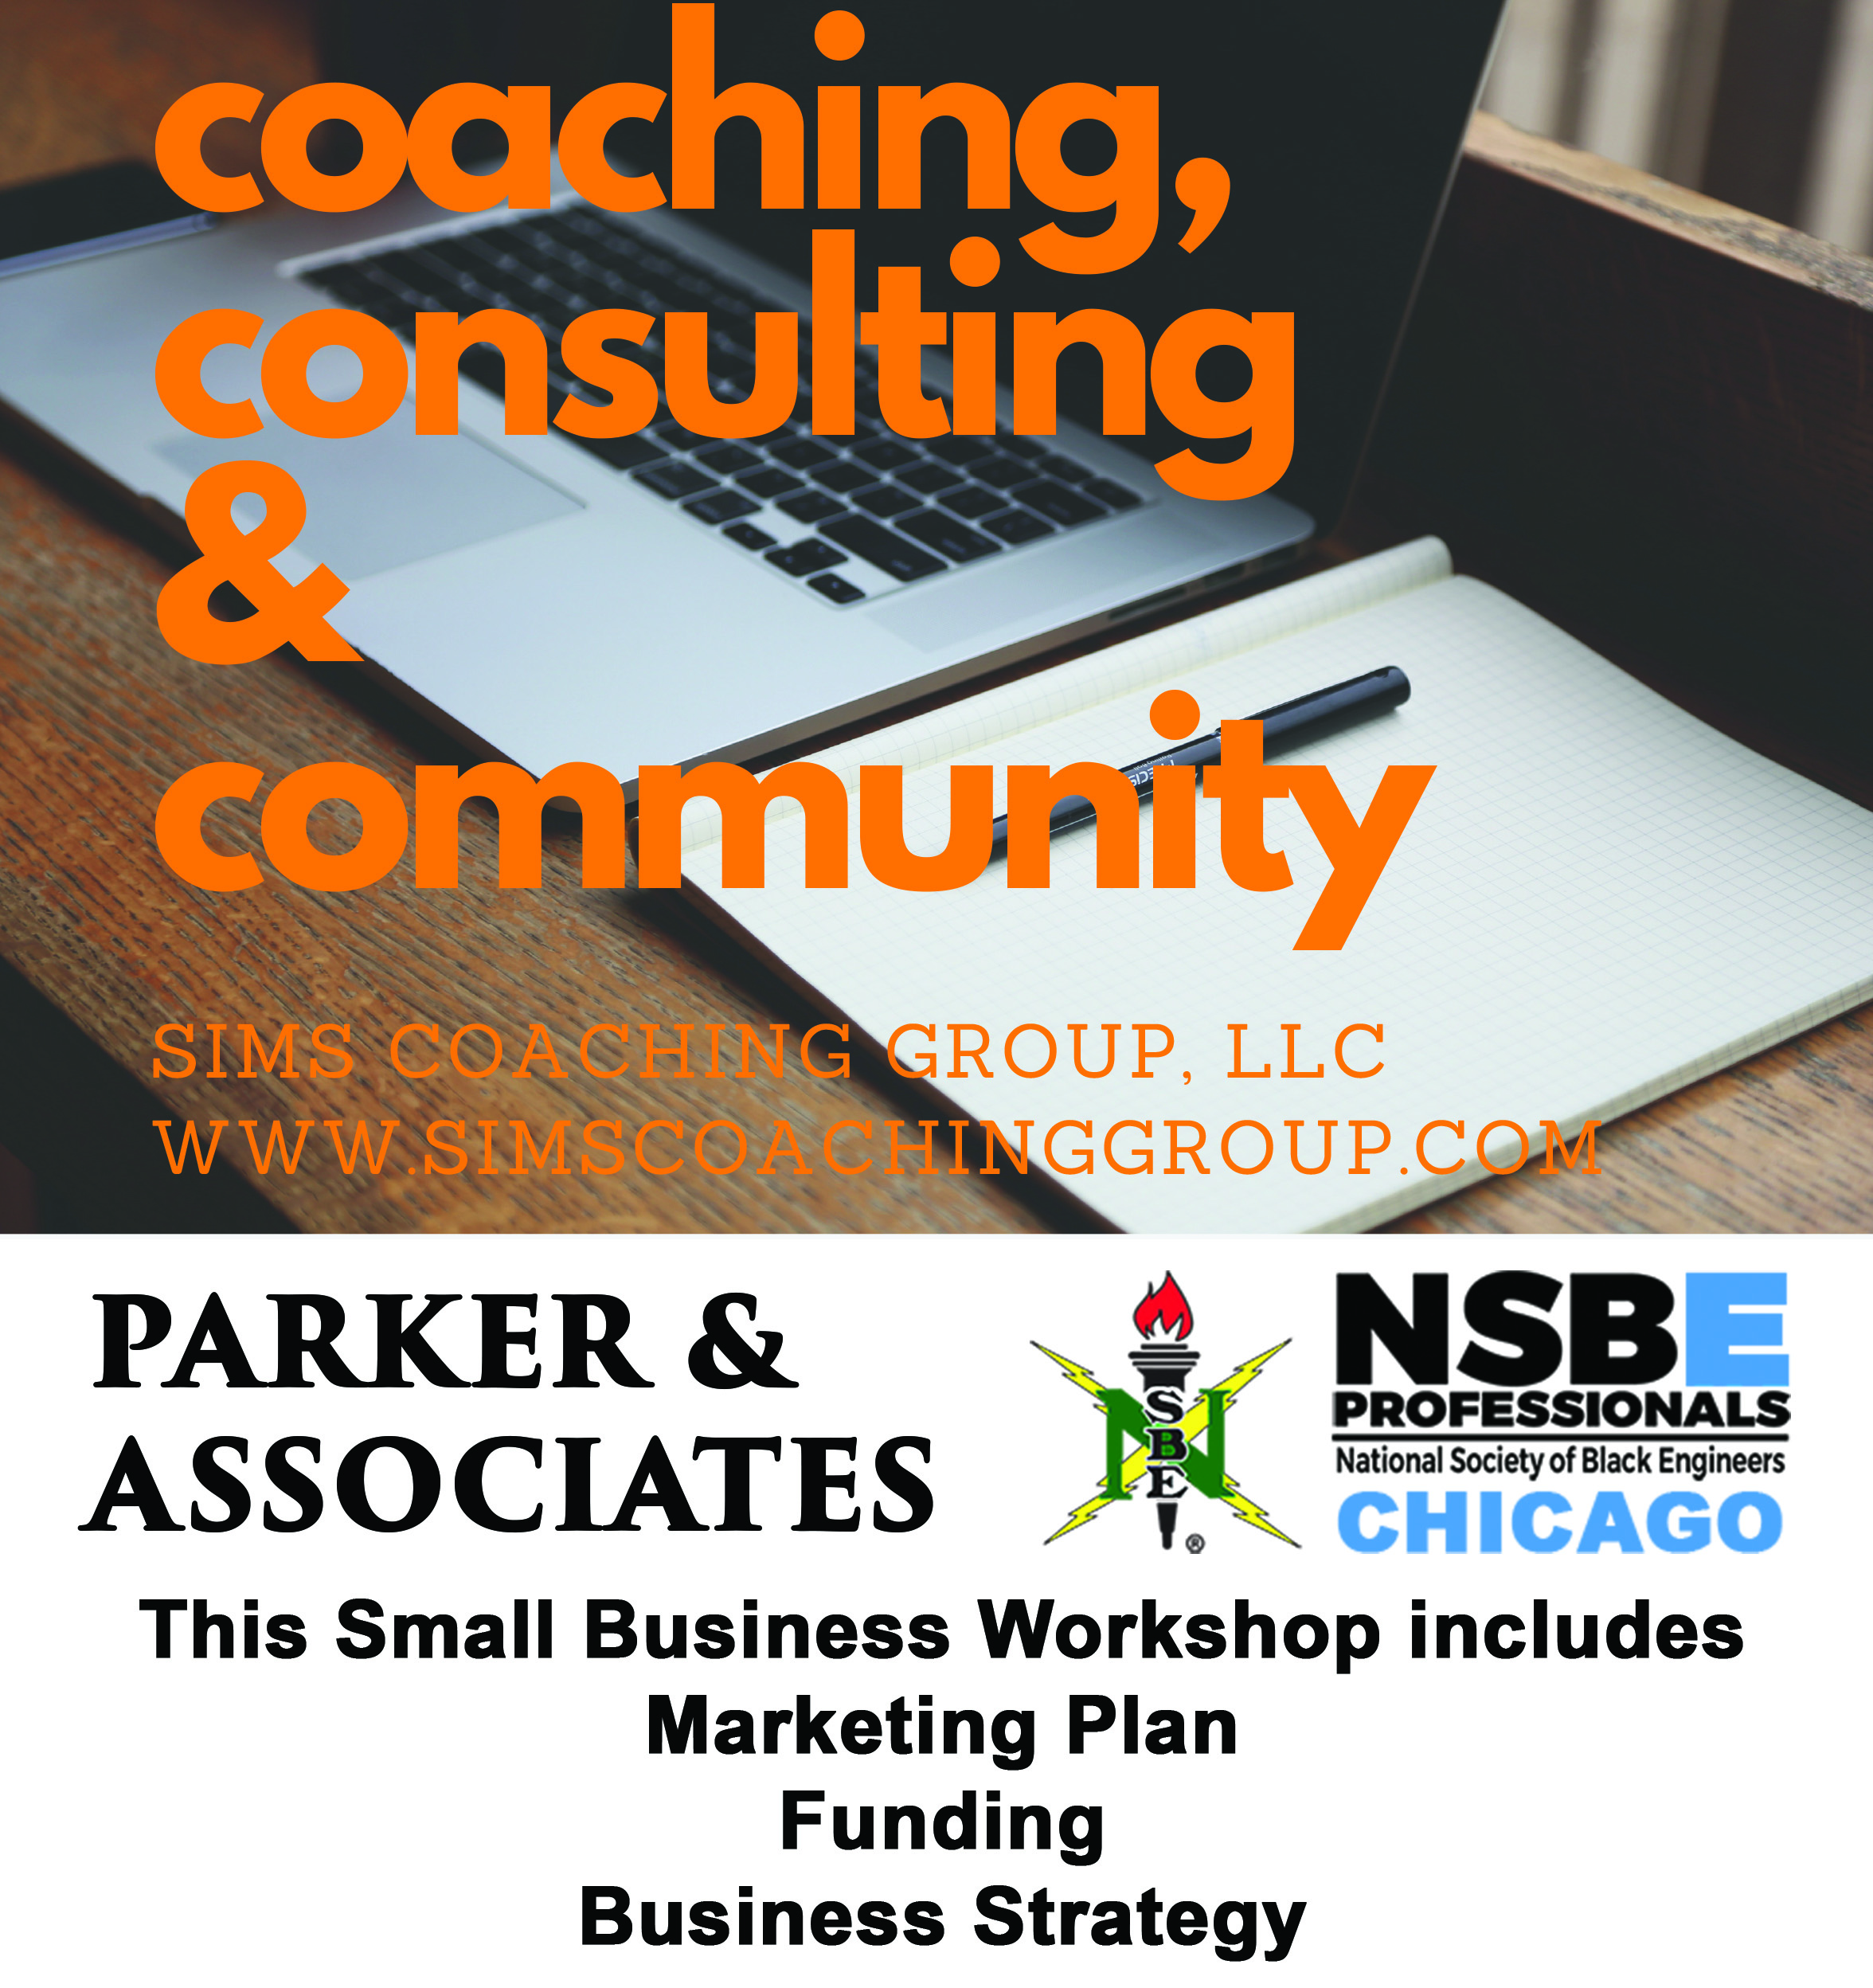 NSBE: Coaching, Consulting & Community